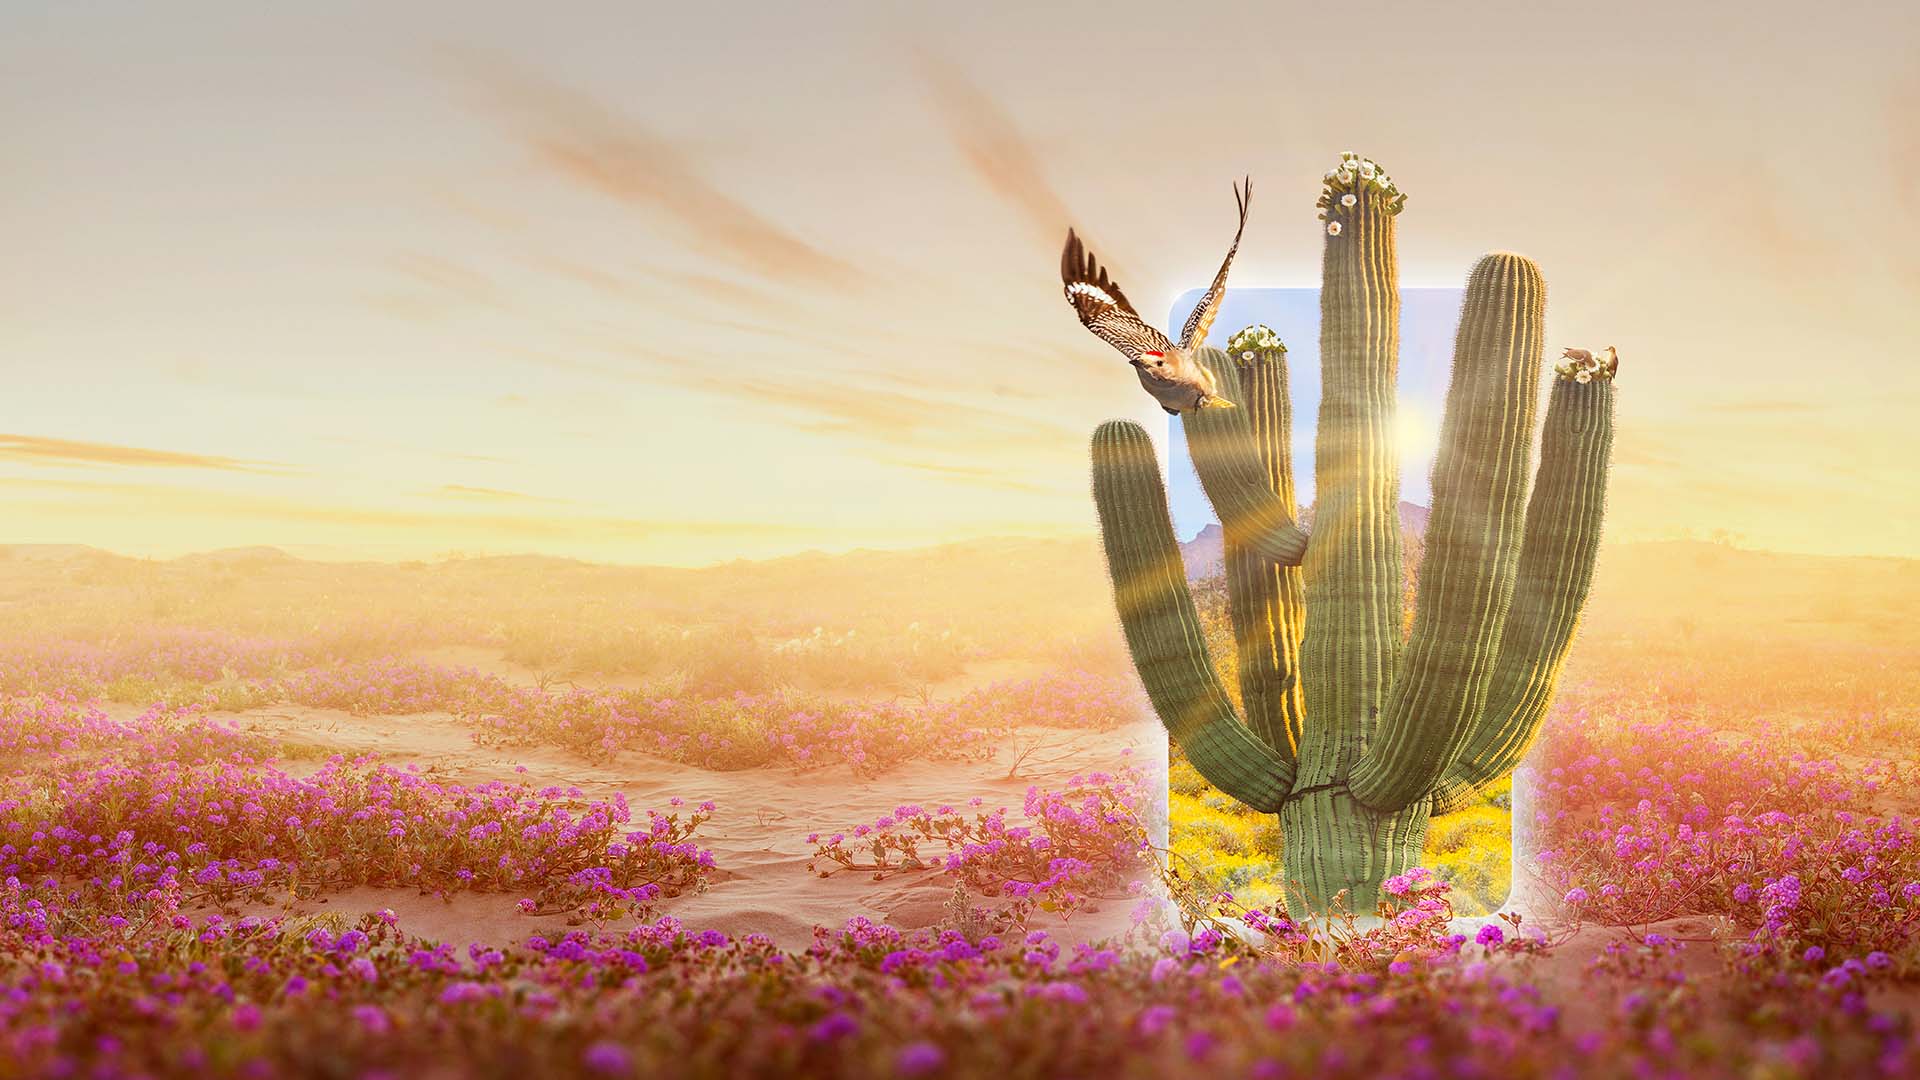 Bird flying past holographic cactus in field of flowers